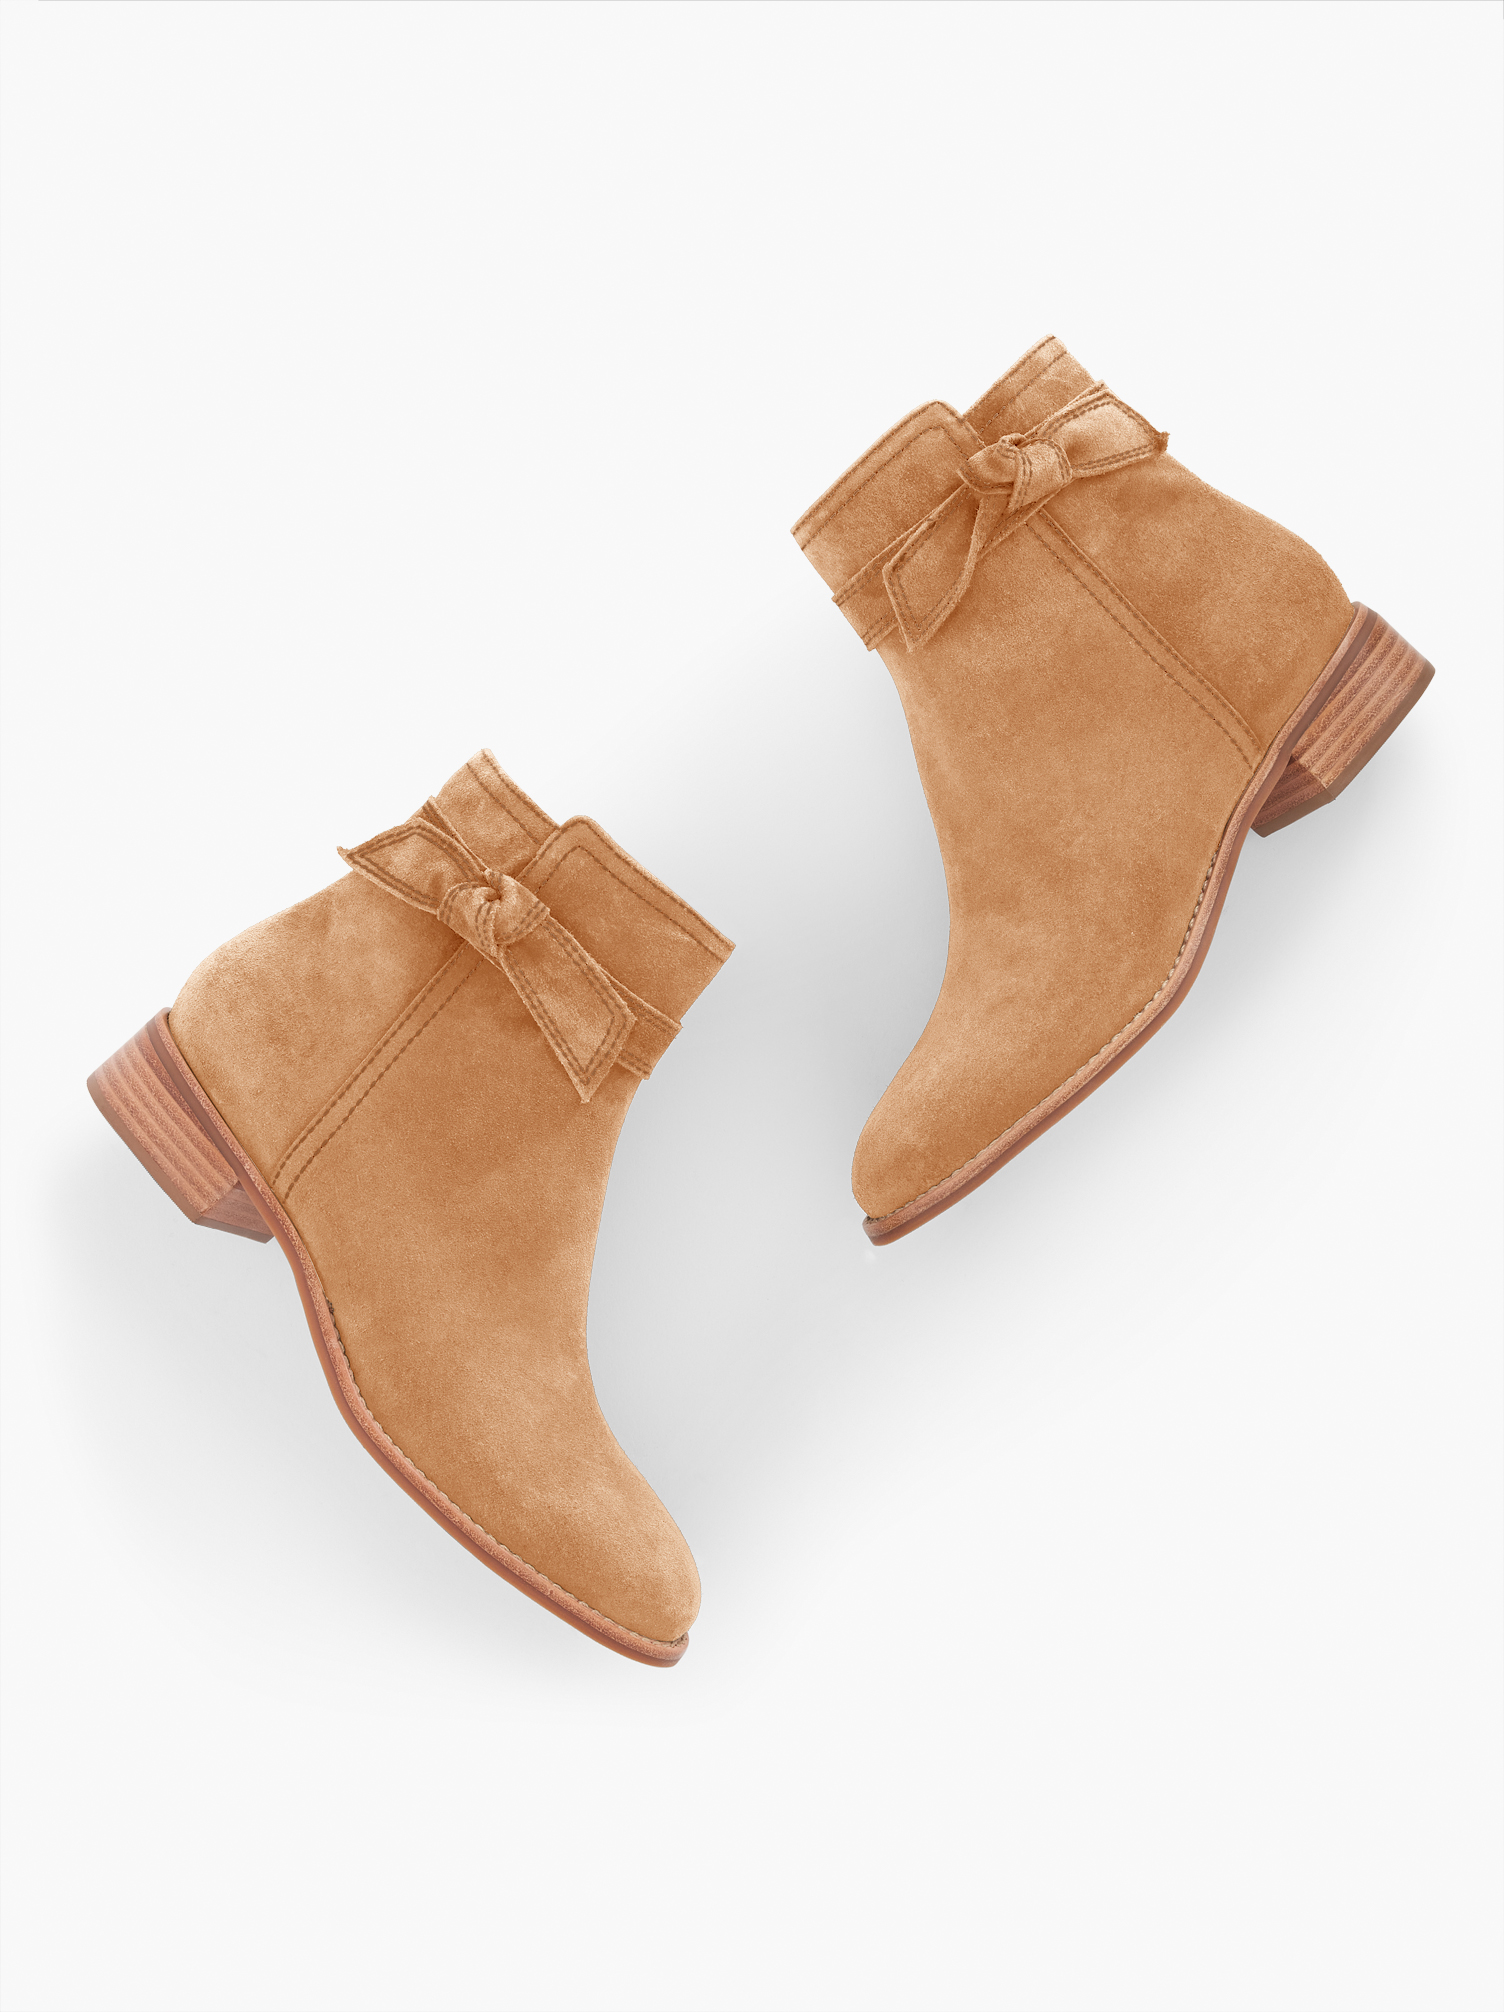 Talbots Tish Bow Ankle Boots - Suede - Light Toffee - 11m